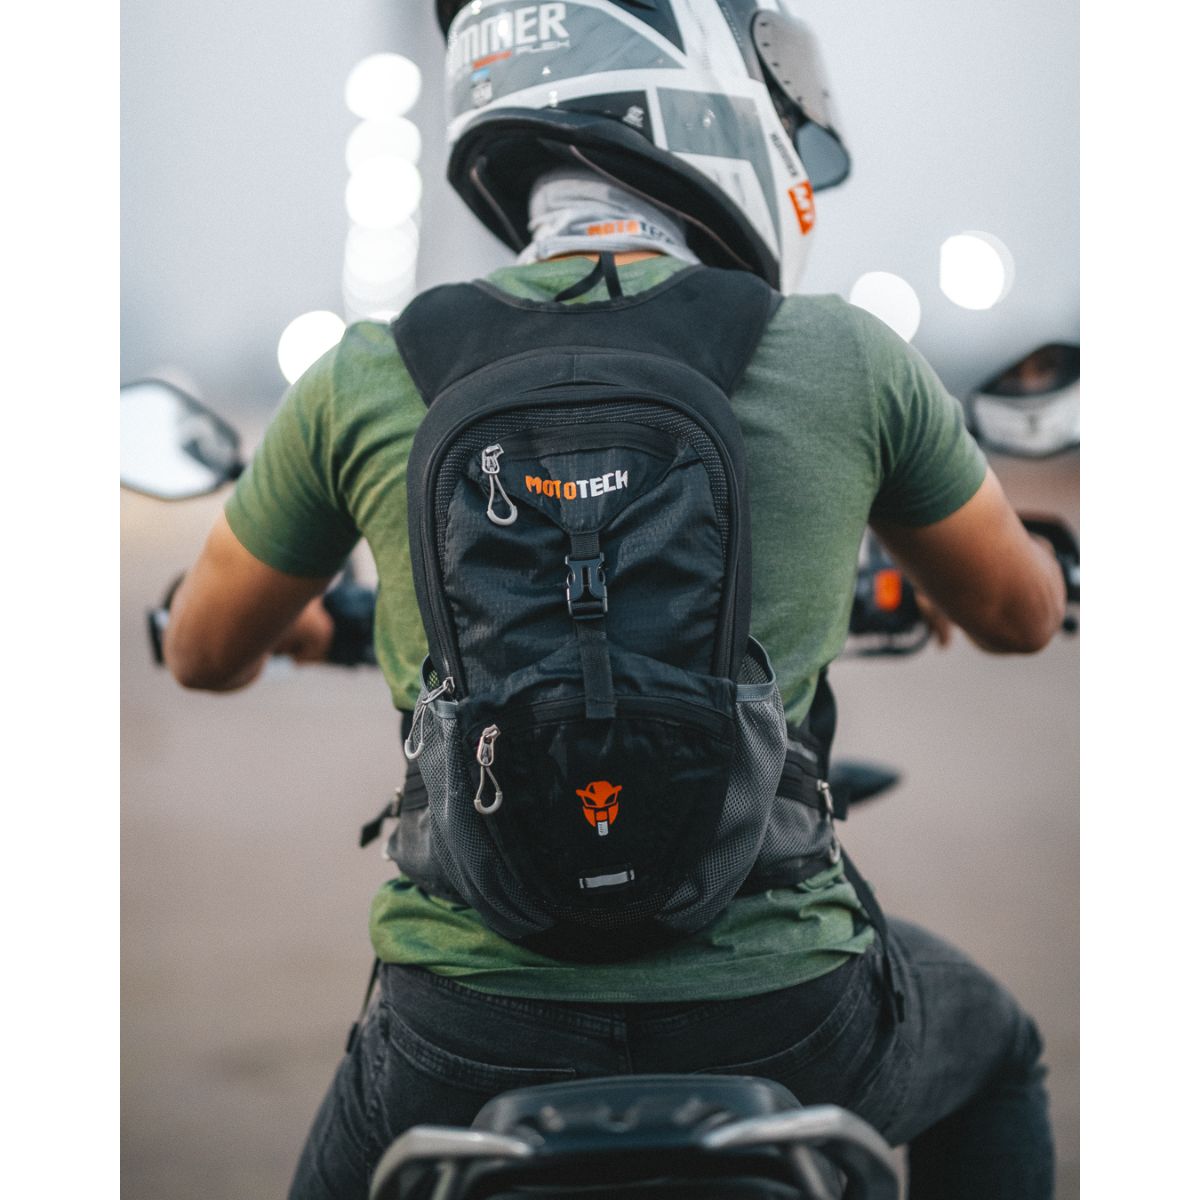 Load video: MOTOTECH Stealth Hydration Backpack